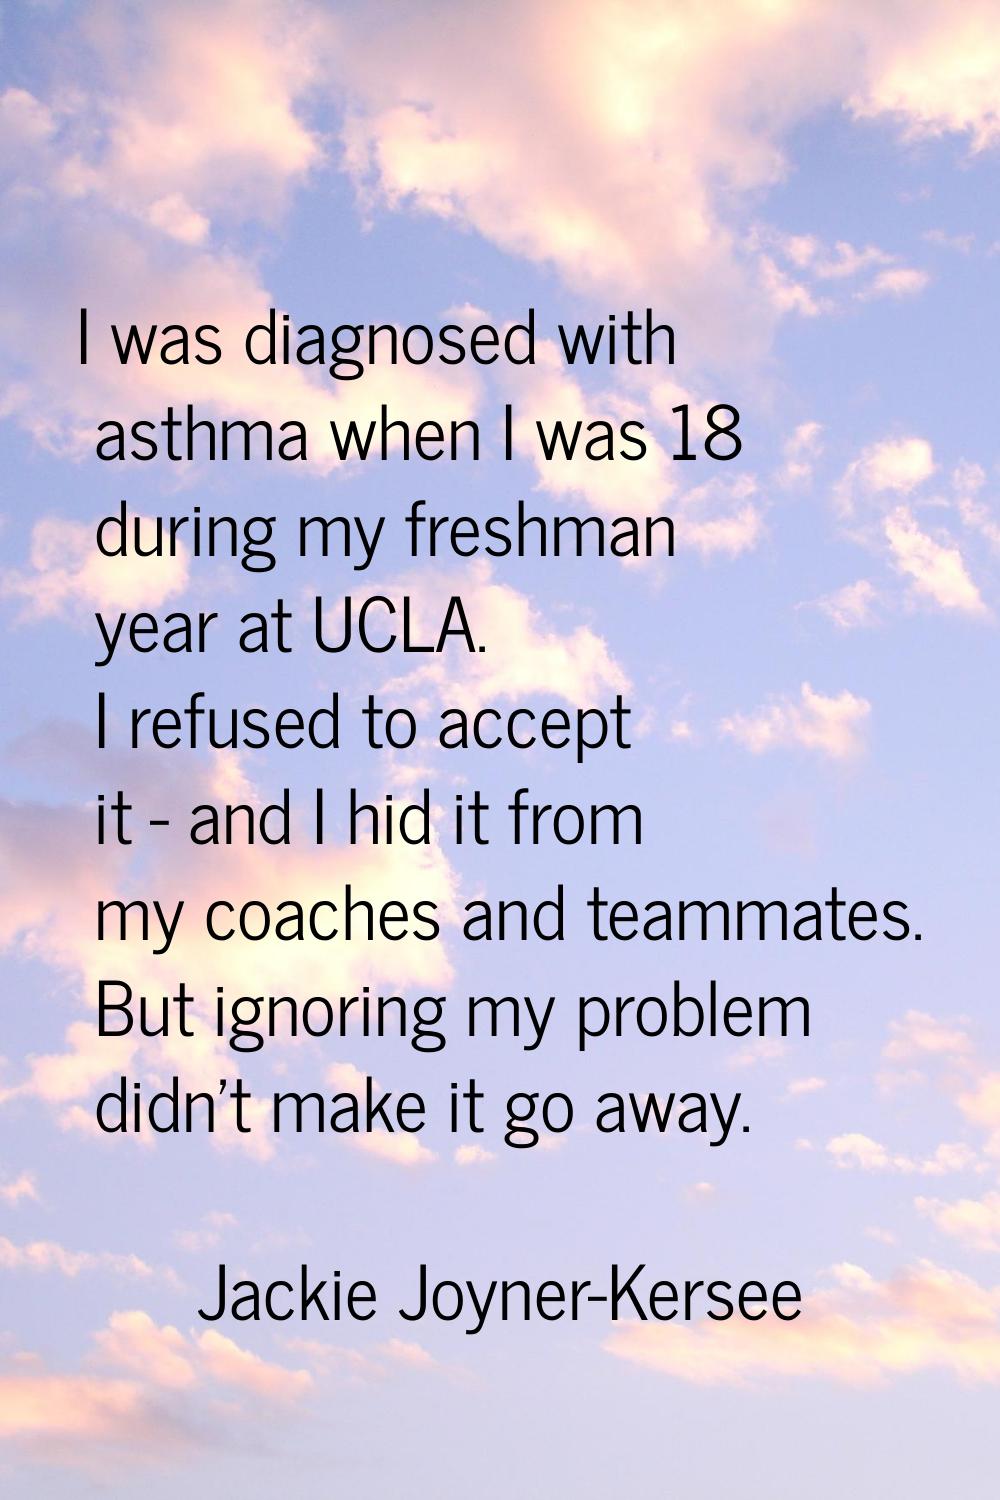 I was diagnosed with asthma when I was 18 during my freshman year at UCLA. I refused to accept it -